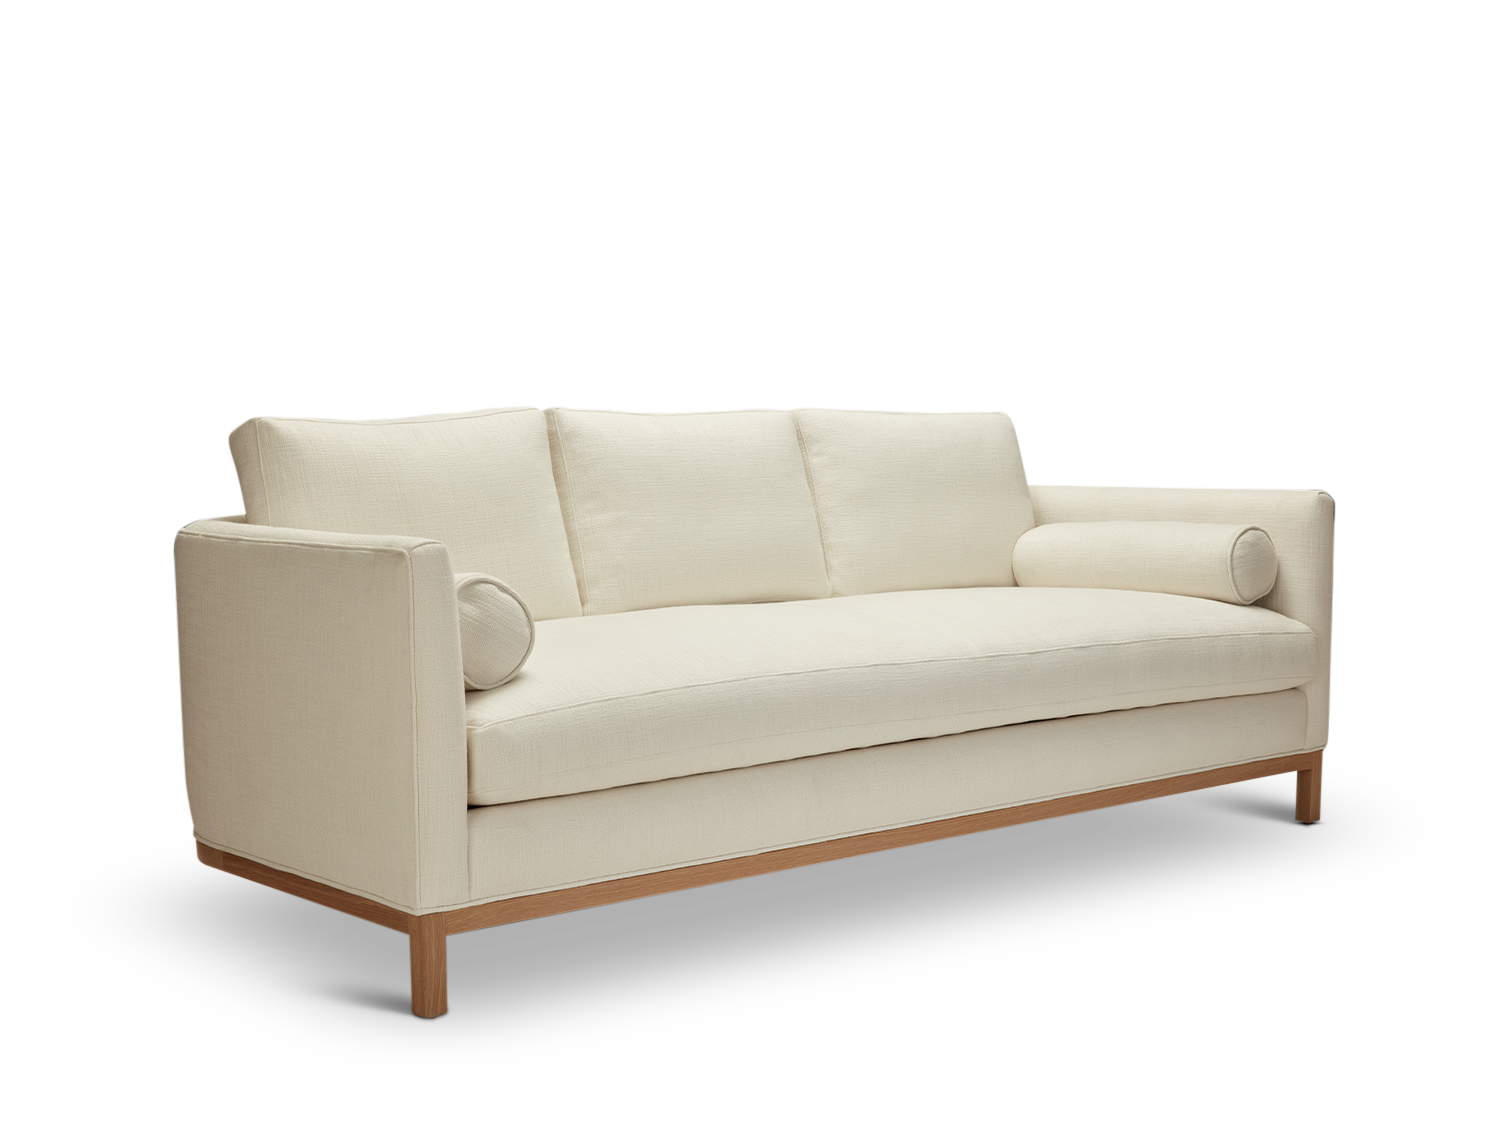 Curved Back Sofa - Contract Grade